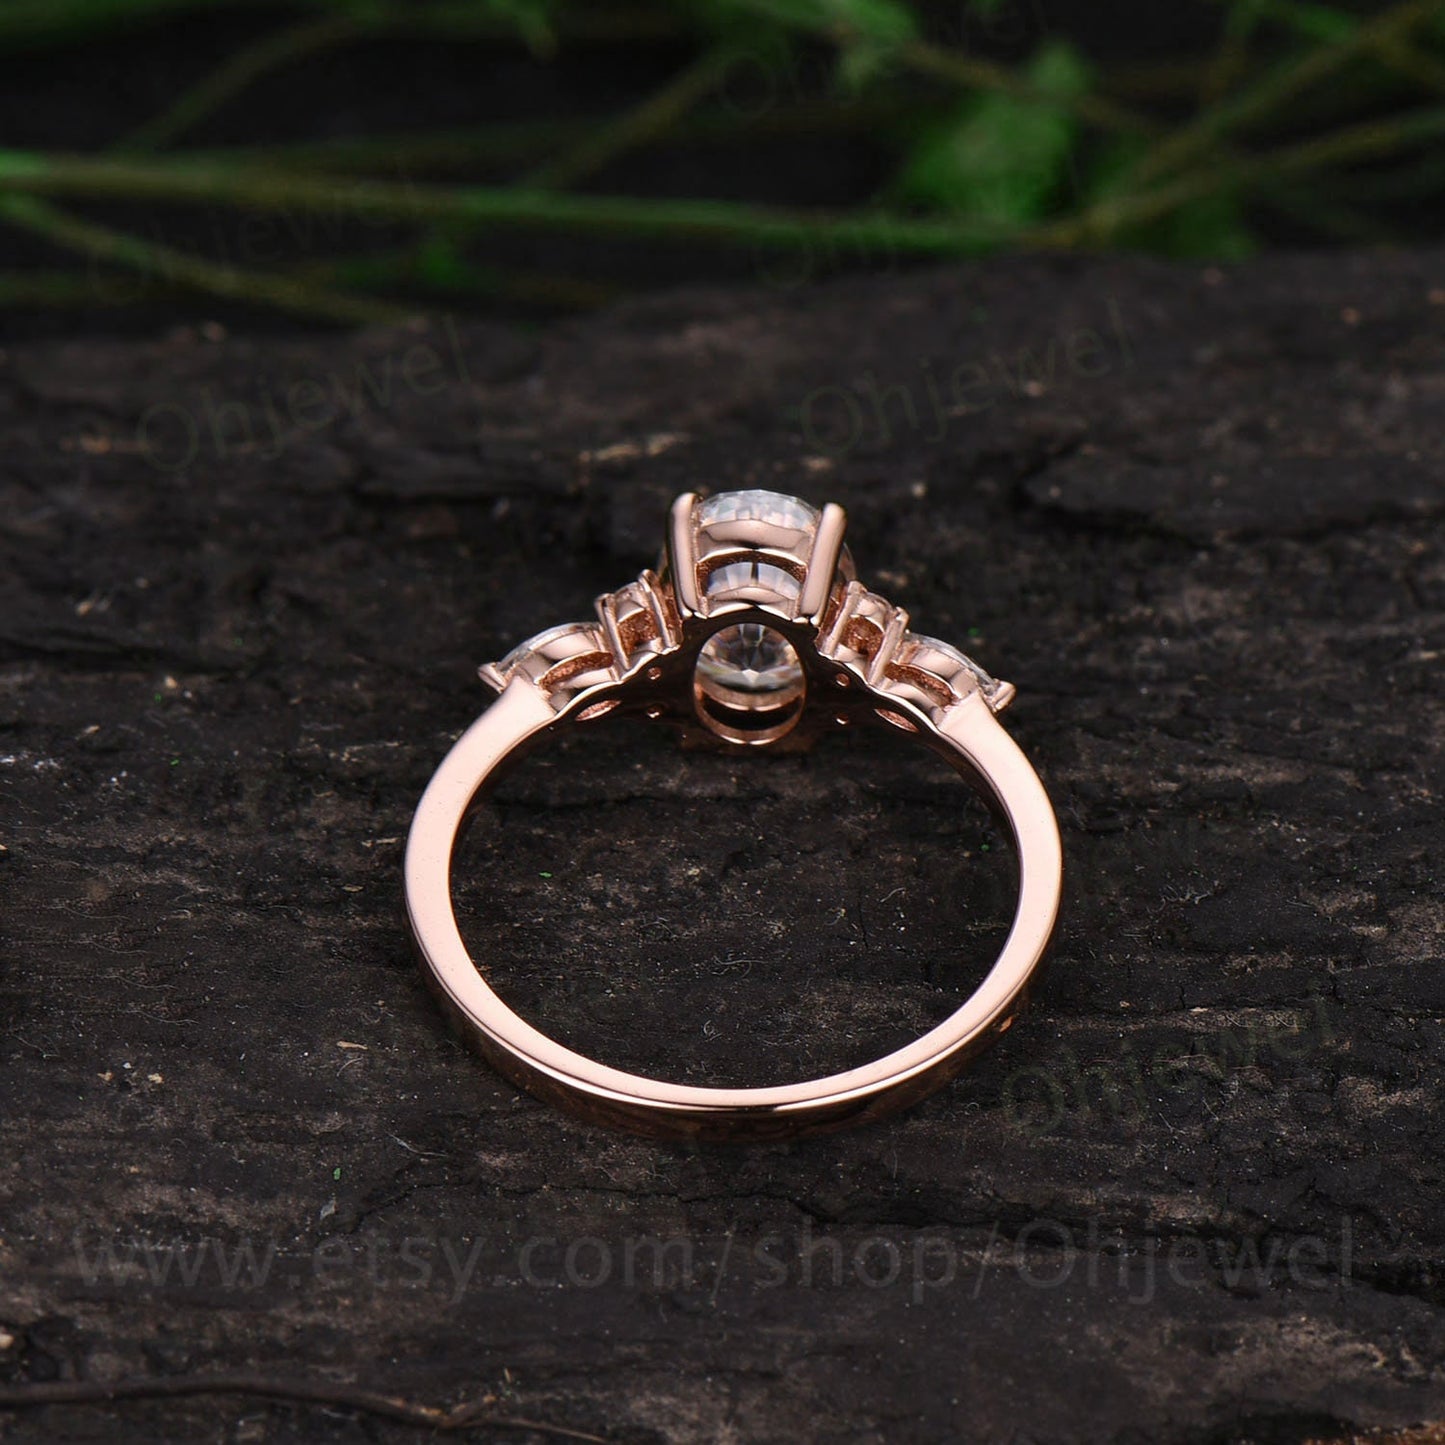 Vintage oval cut moissanite engagement ring art deco rose gold marquise cut moissanite ring for women unique wedding anniversary ring gift